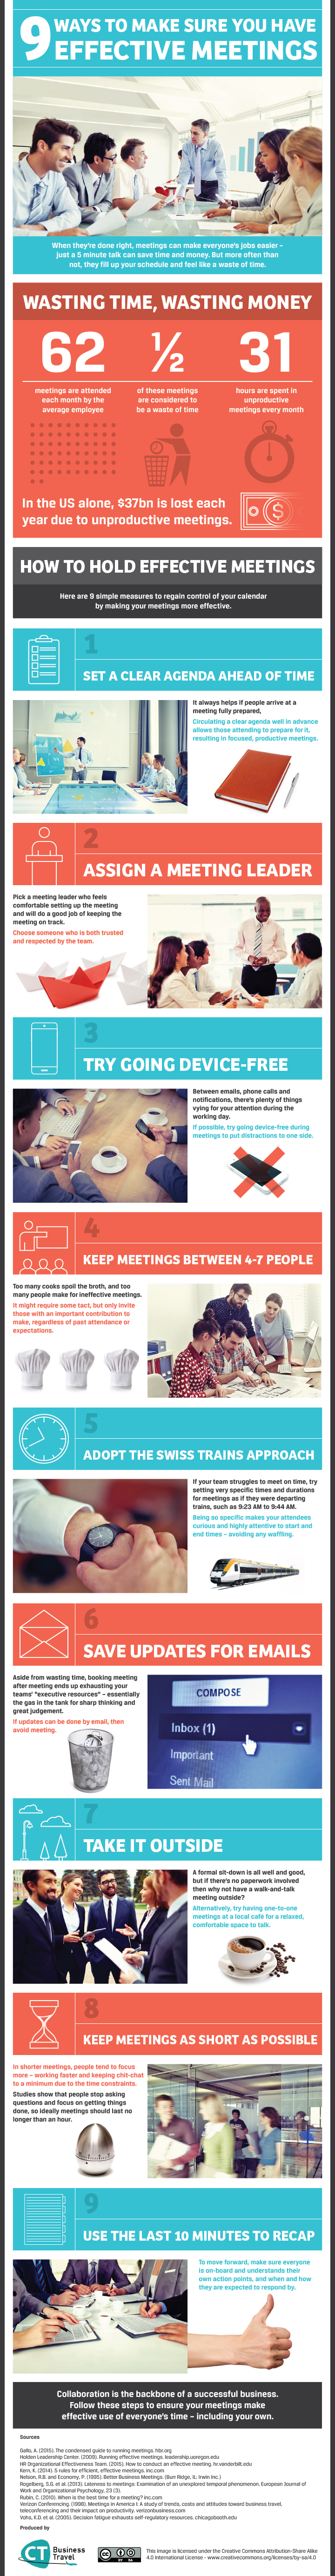 9 Ways to Make Sure You Run Effective Meetings (Infographic)